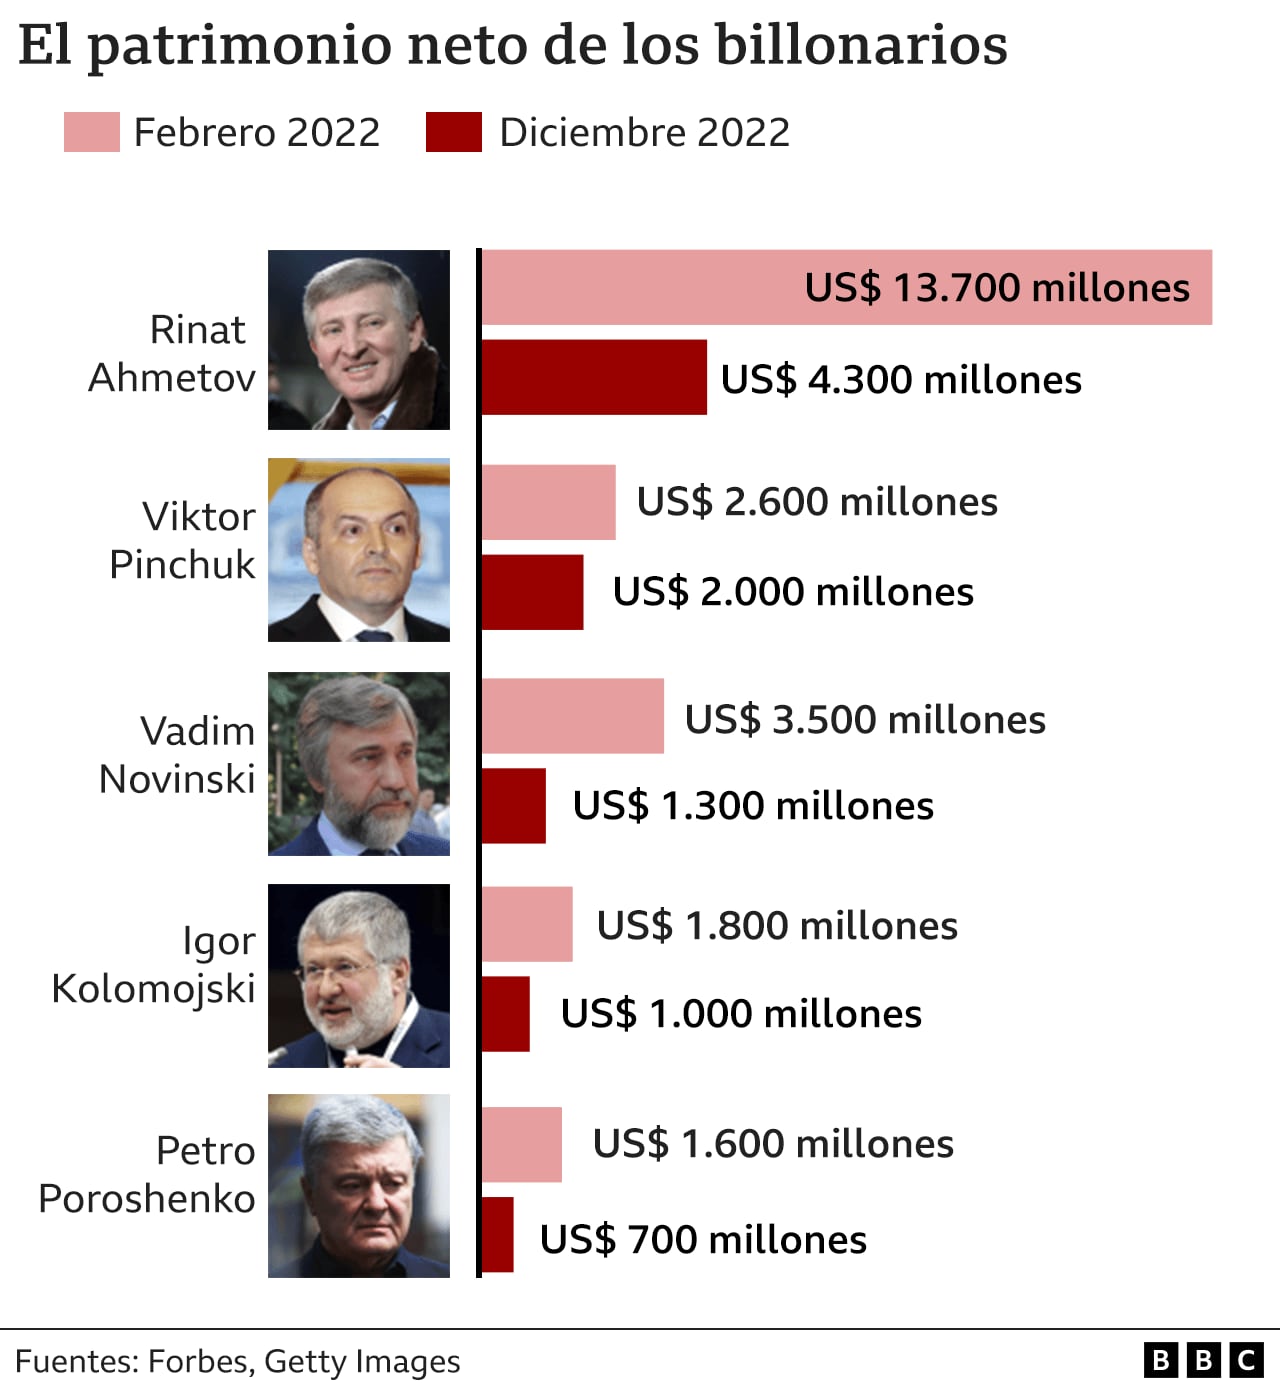 The list of oligarchs